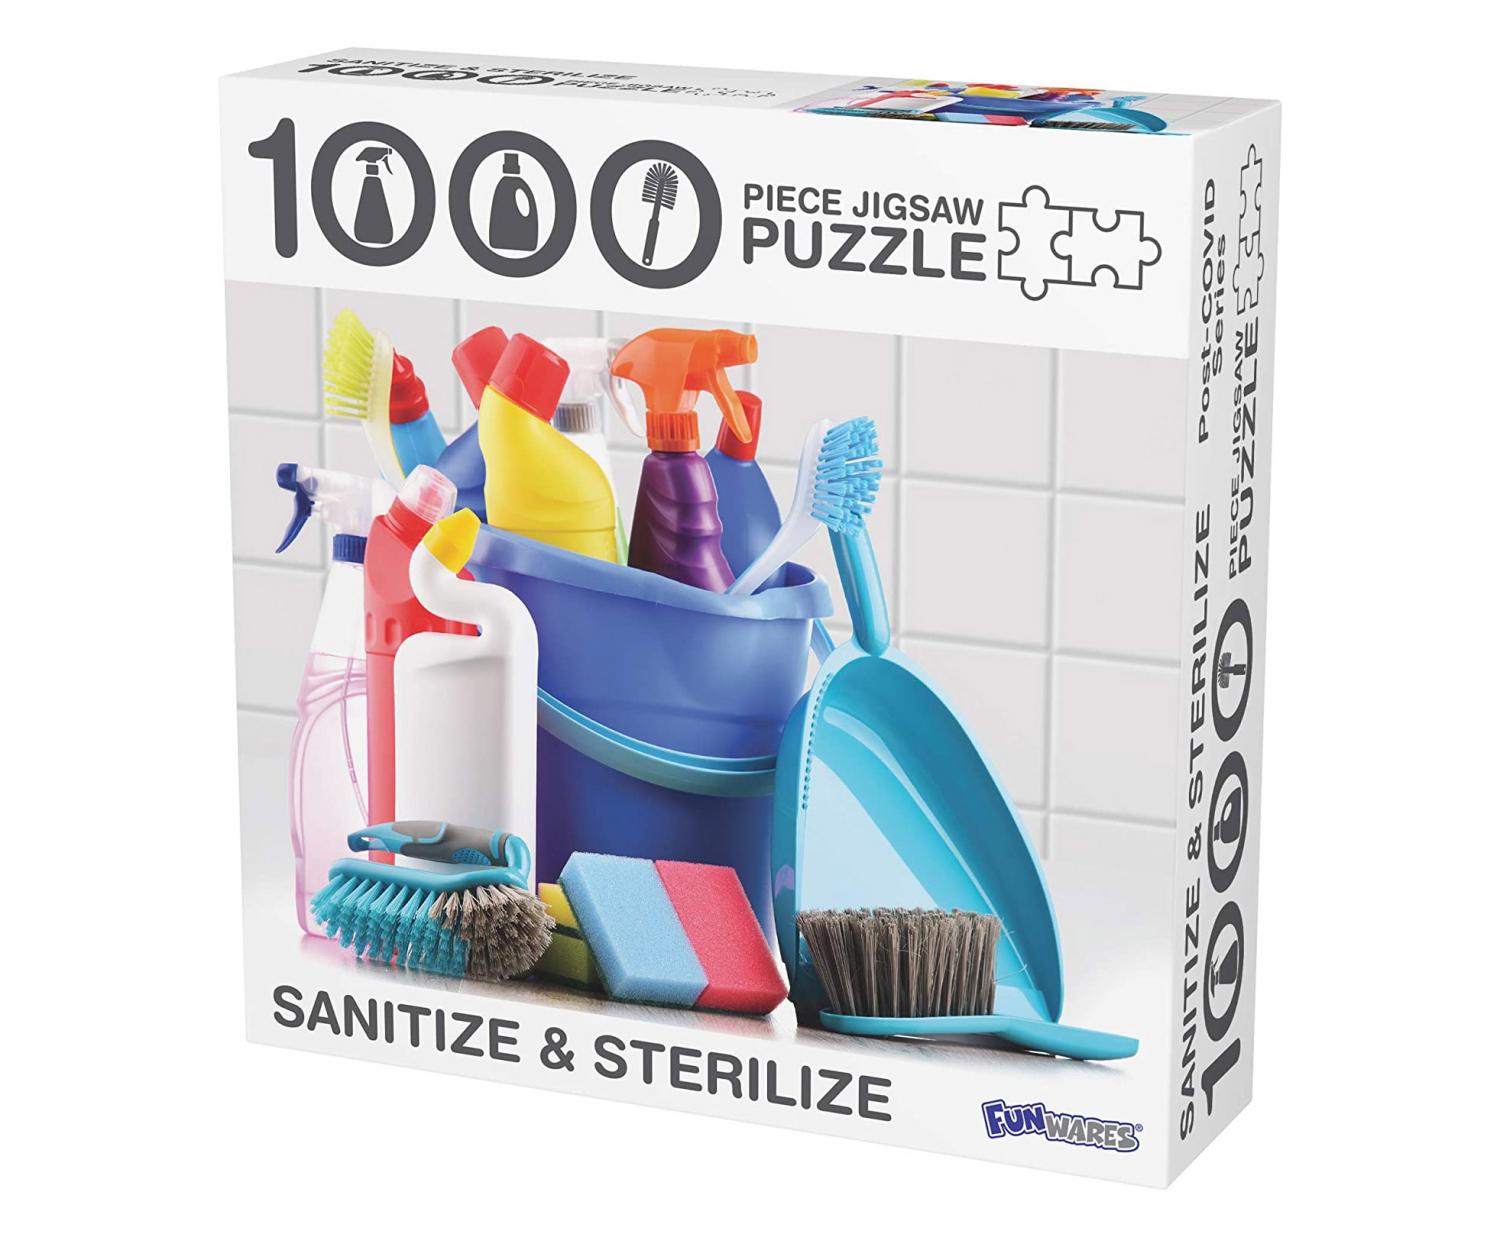 Cleaning Supplies Jigsaw Puzzle - Funny Quarantine pandemic puzzle